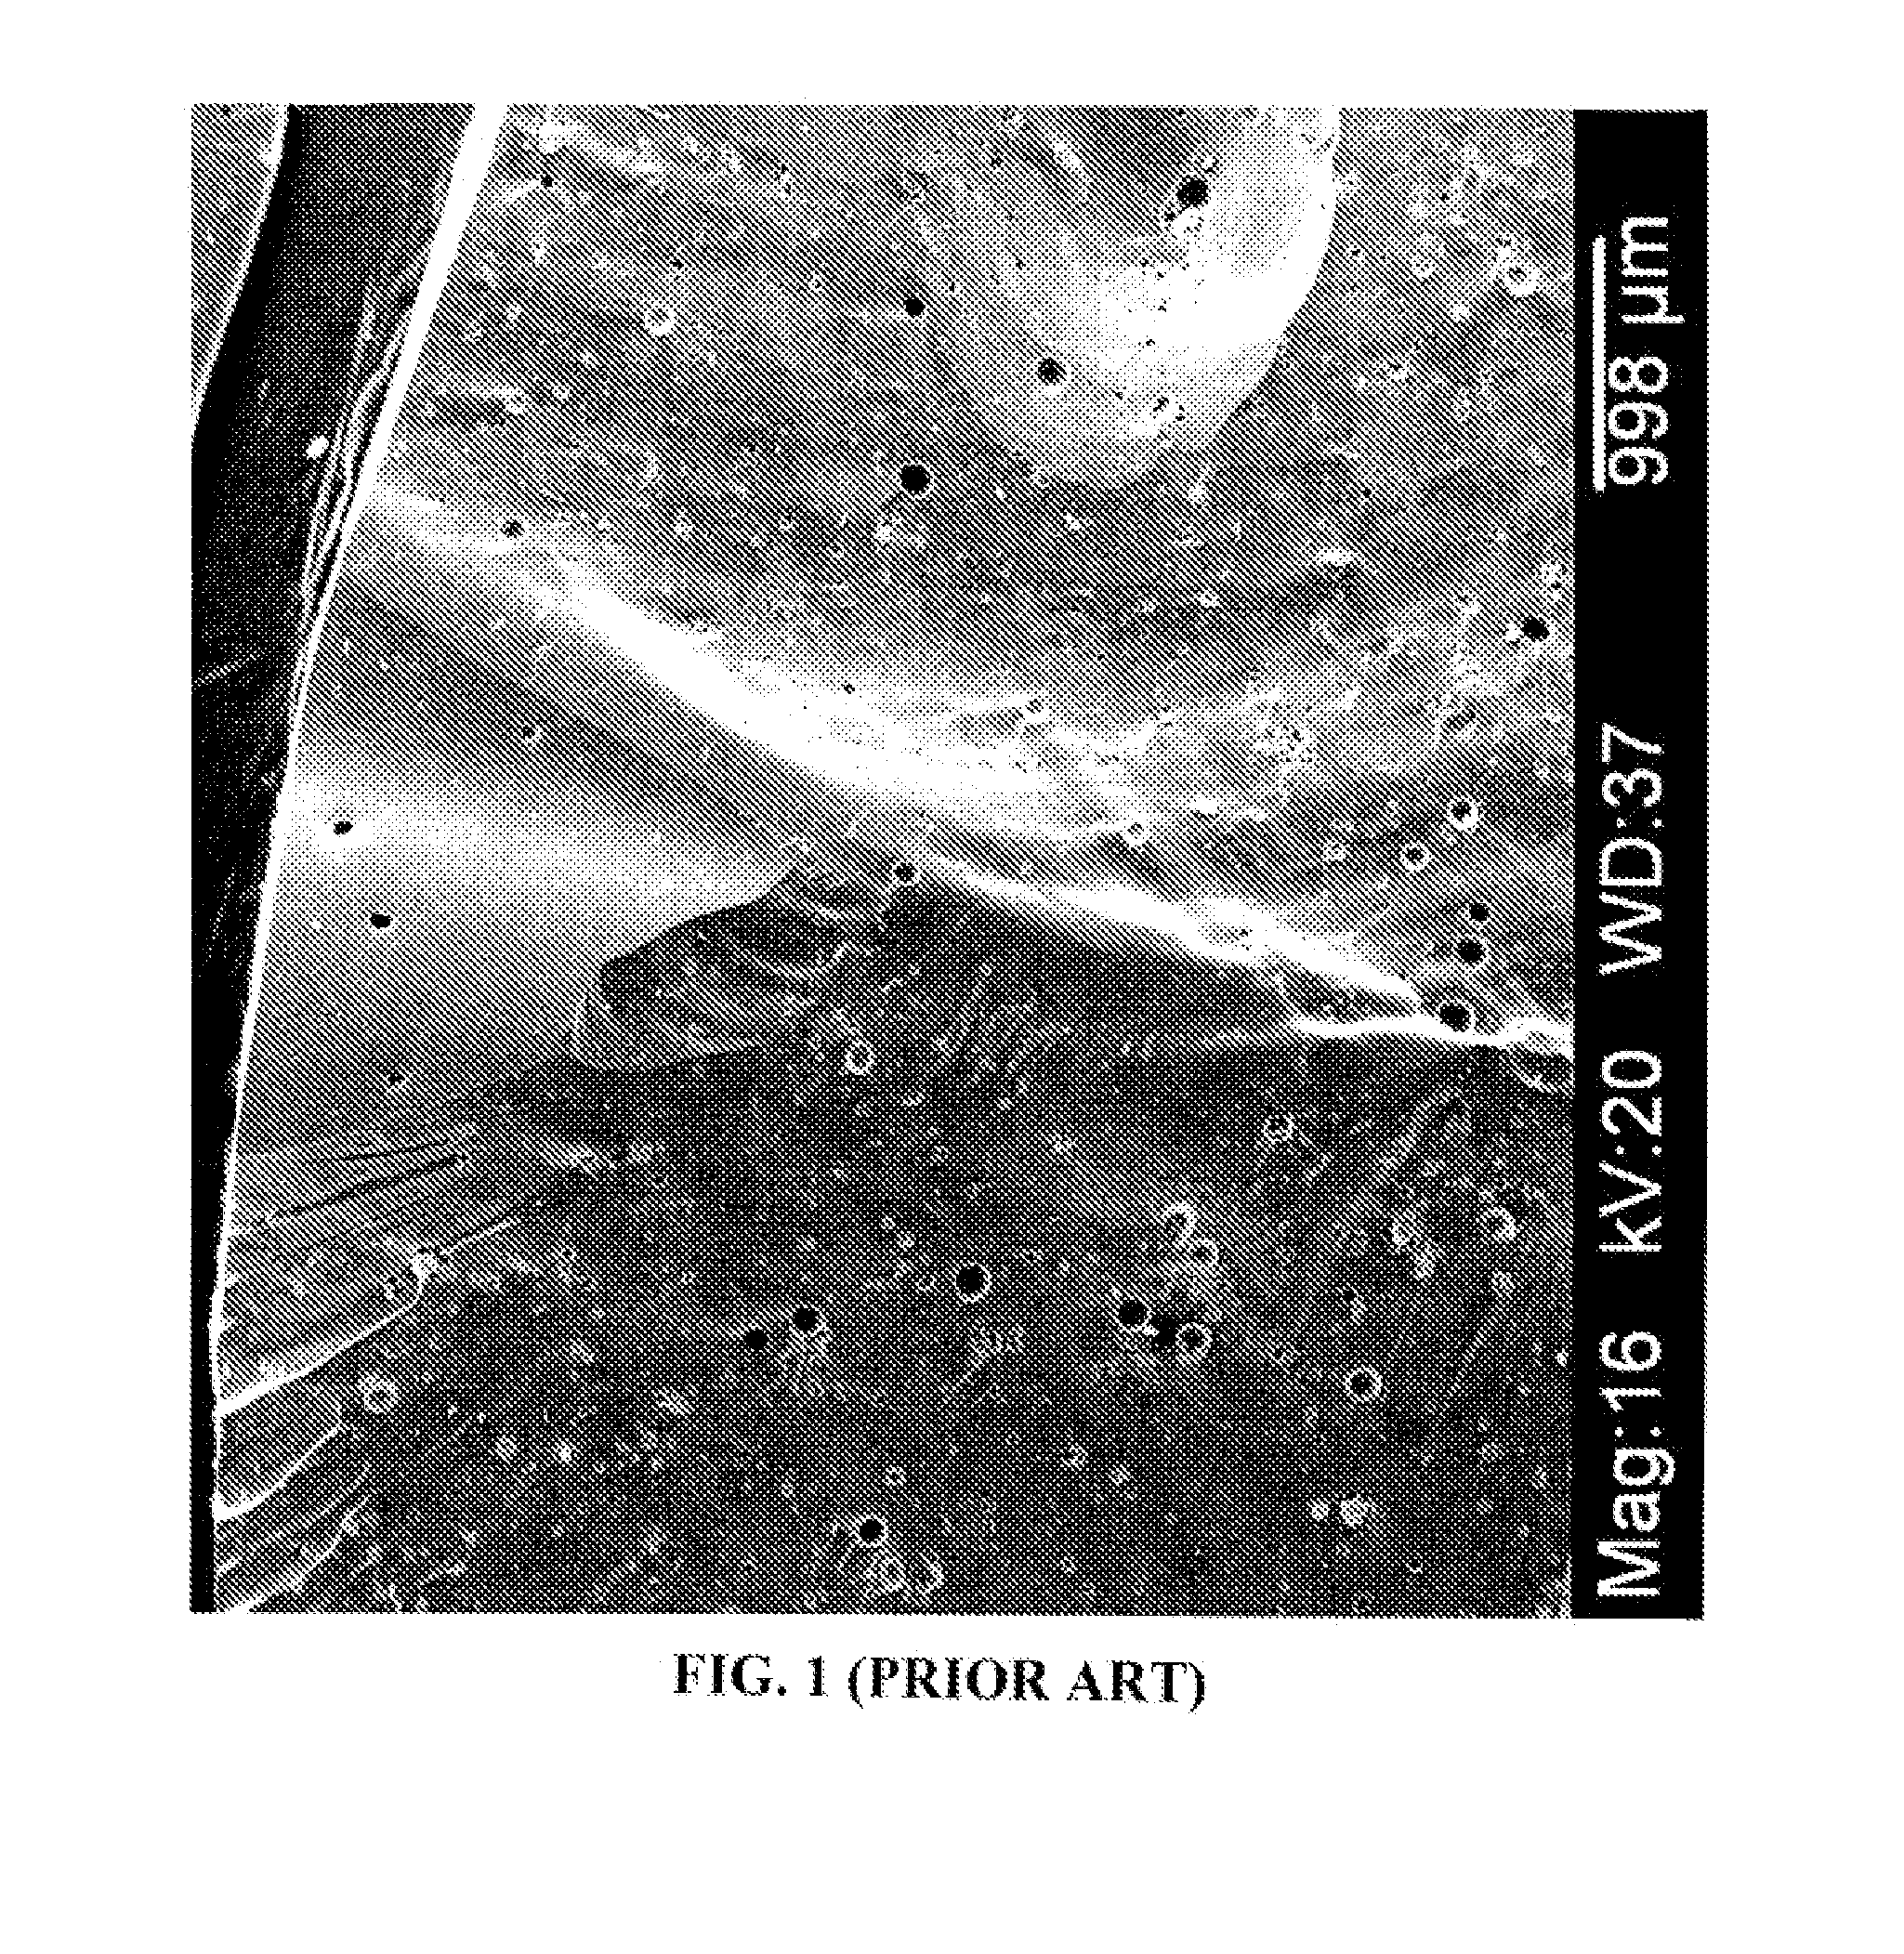 Biphasic nanoporous vitreous carbon material and method of making the same